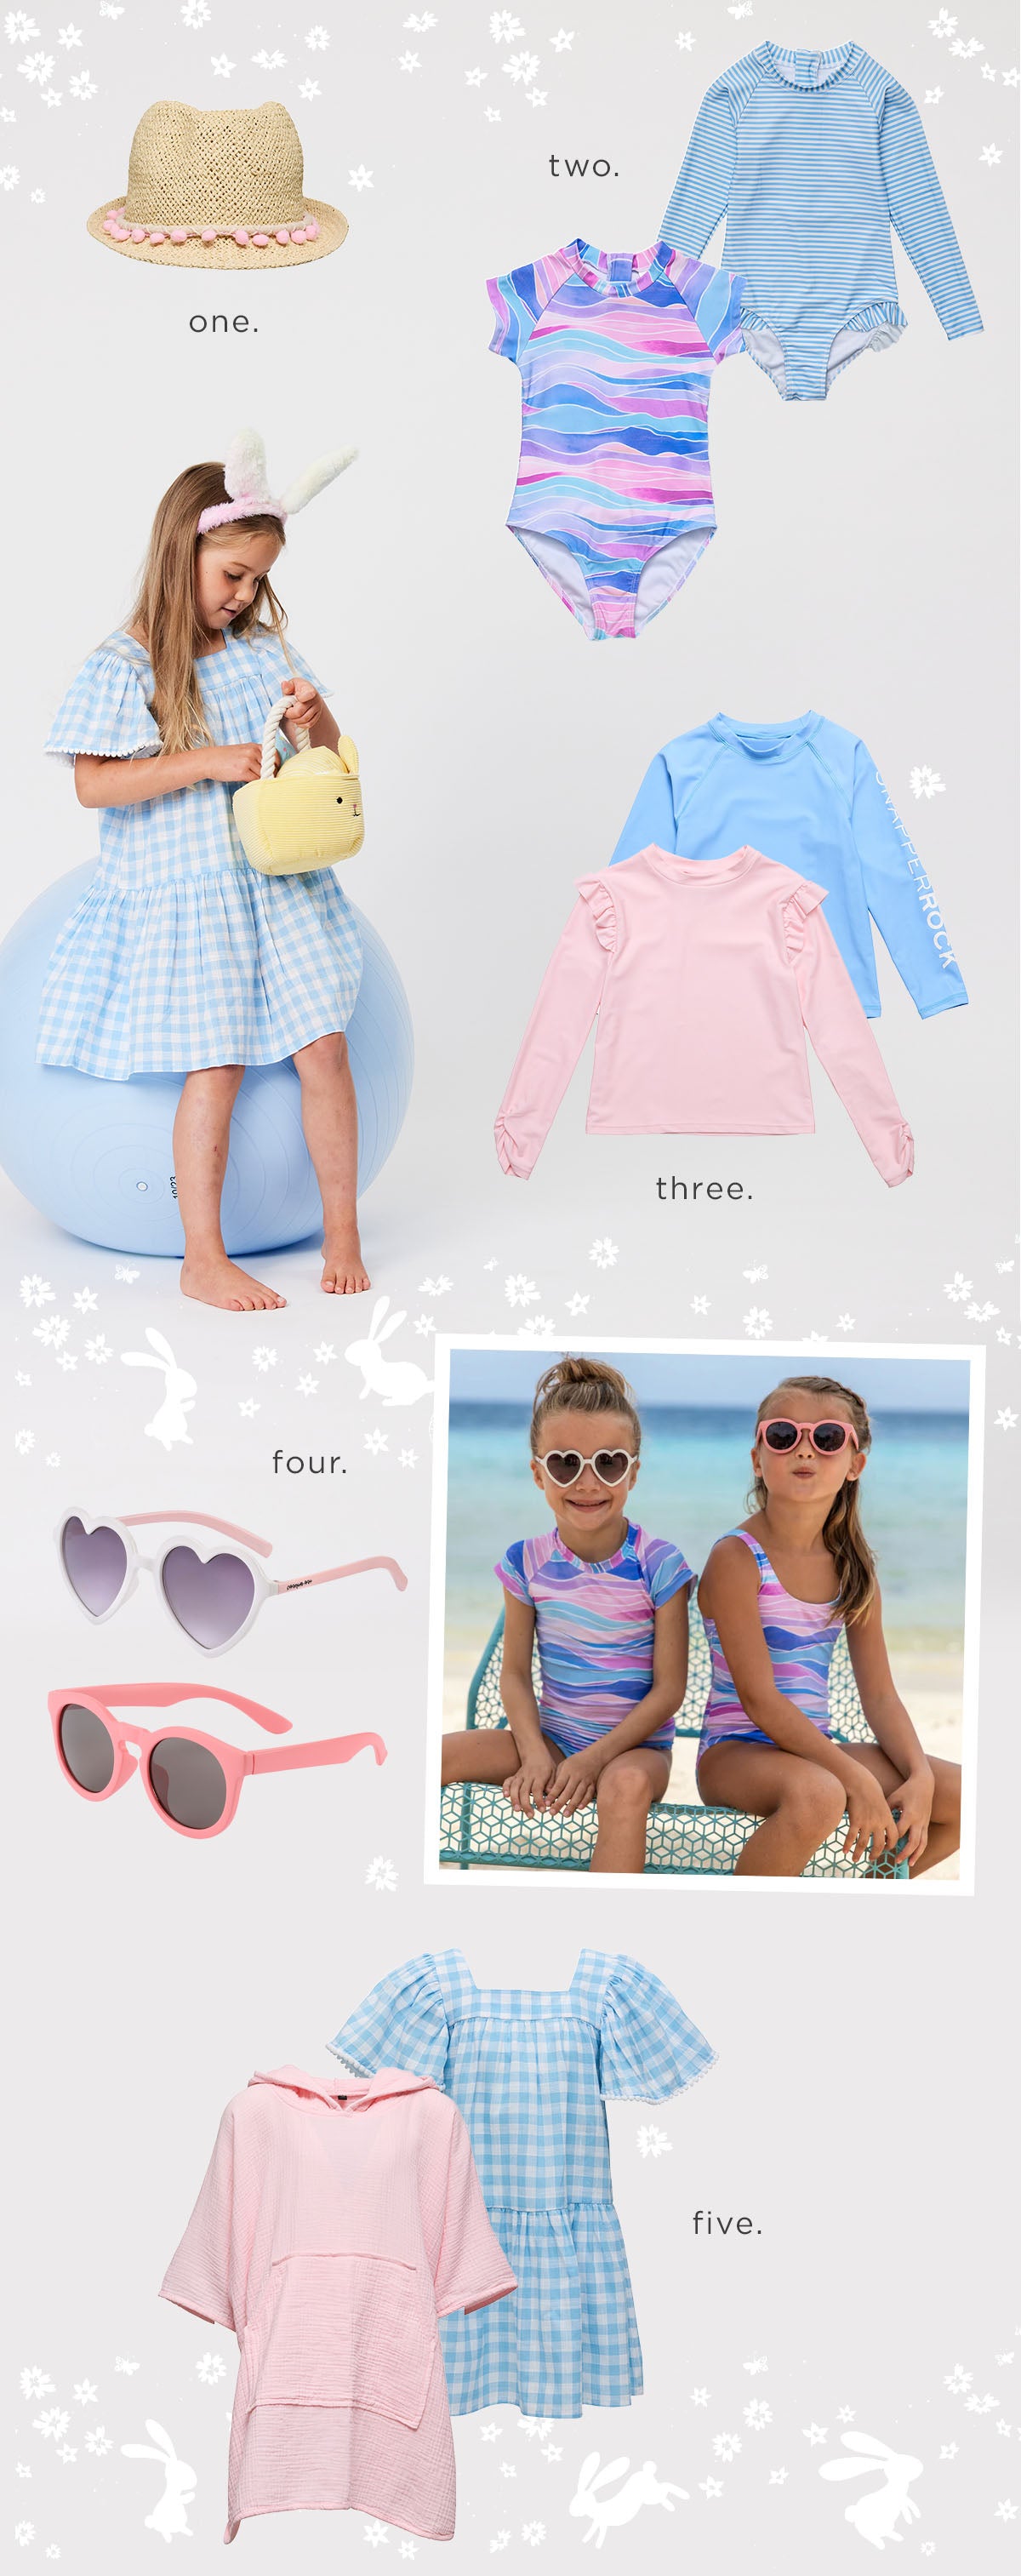 12 gift ideas for a girls themed beach Easter basket.